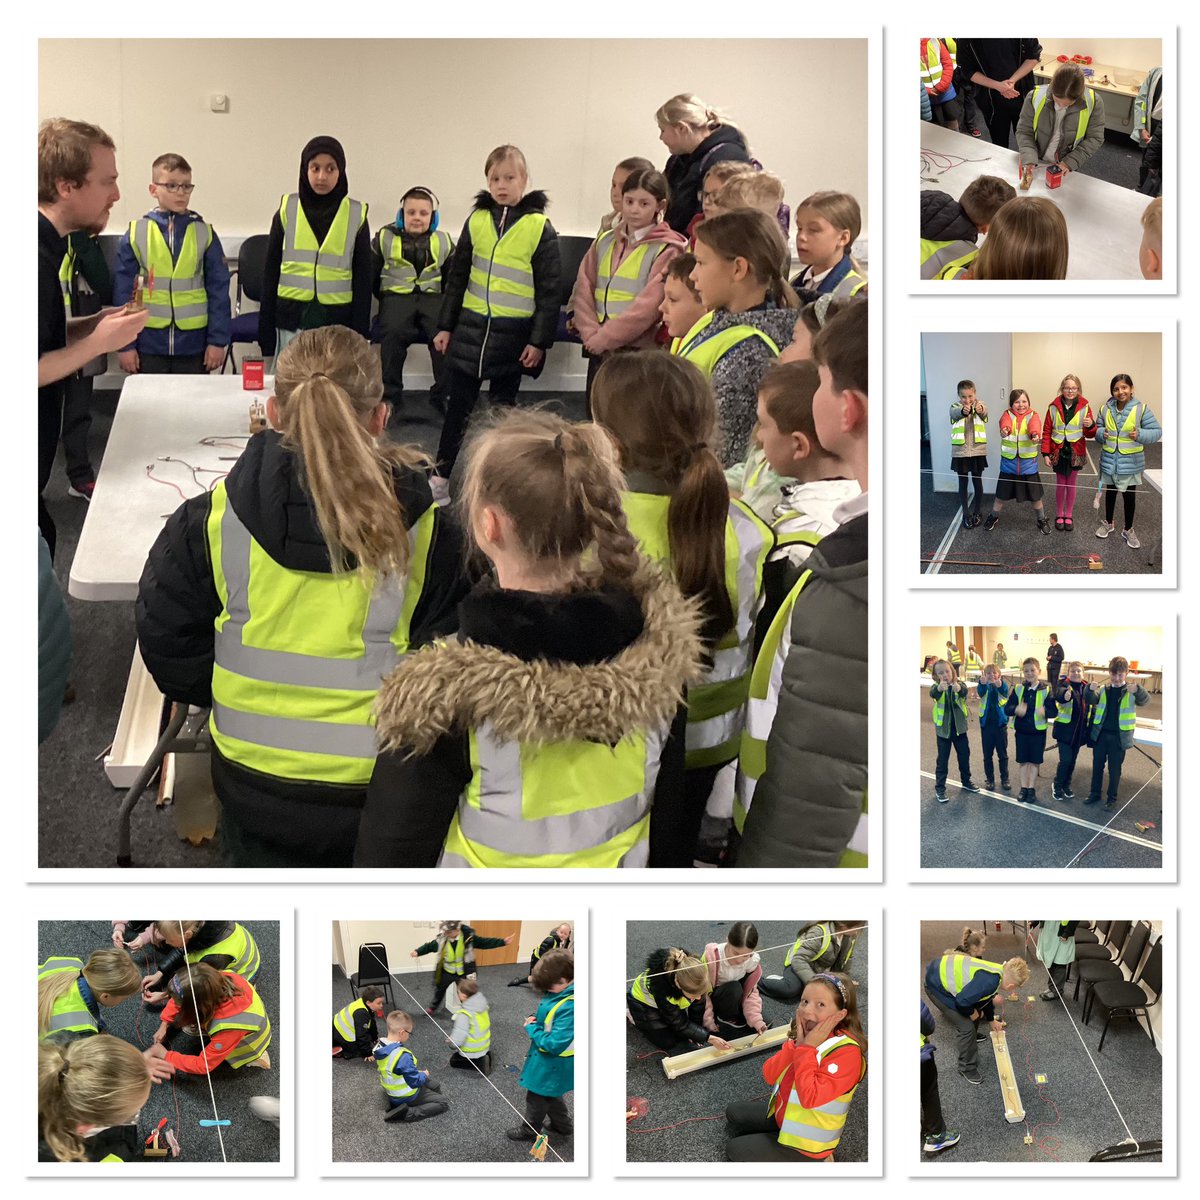 Our electricity workshop at Magna today allowed the children to retrieve their prior learning to support in challenges when creating circuits. They used copper, water, spoons and their curiosity to know more and do more. @SpaldingPriAcad @InfinityAcad